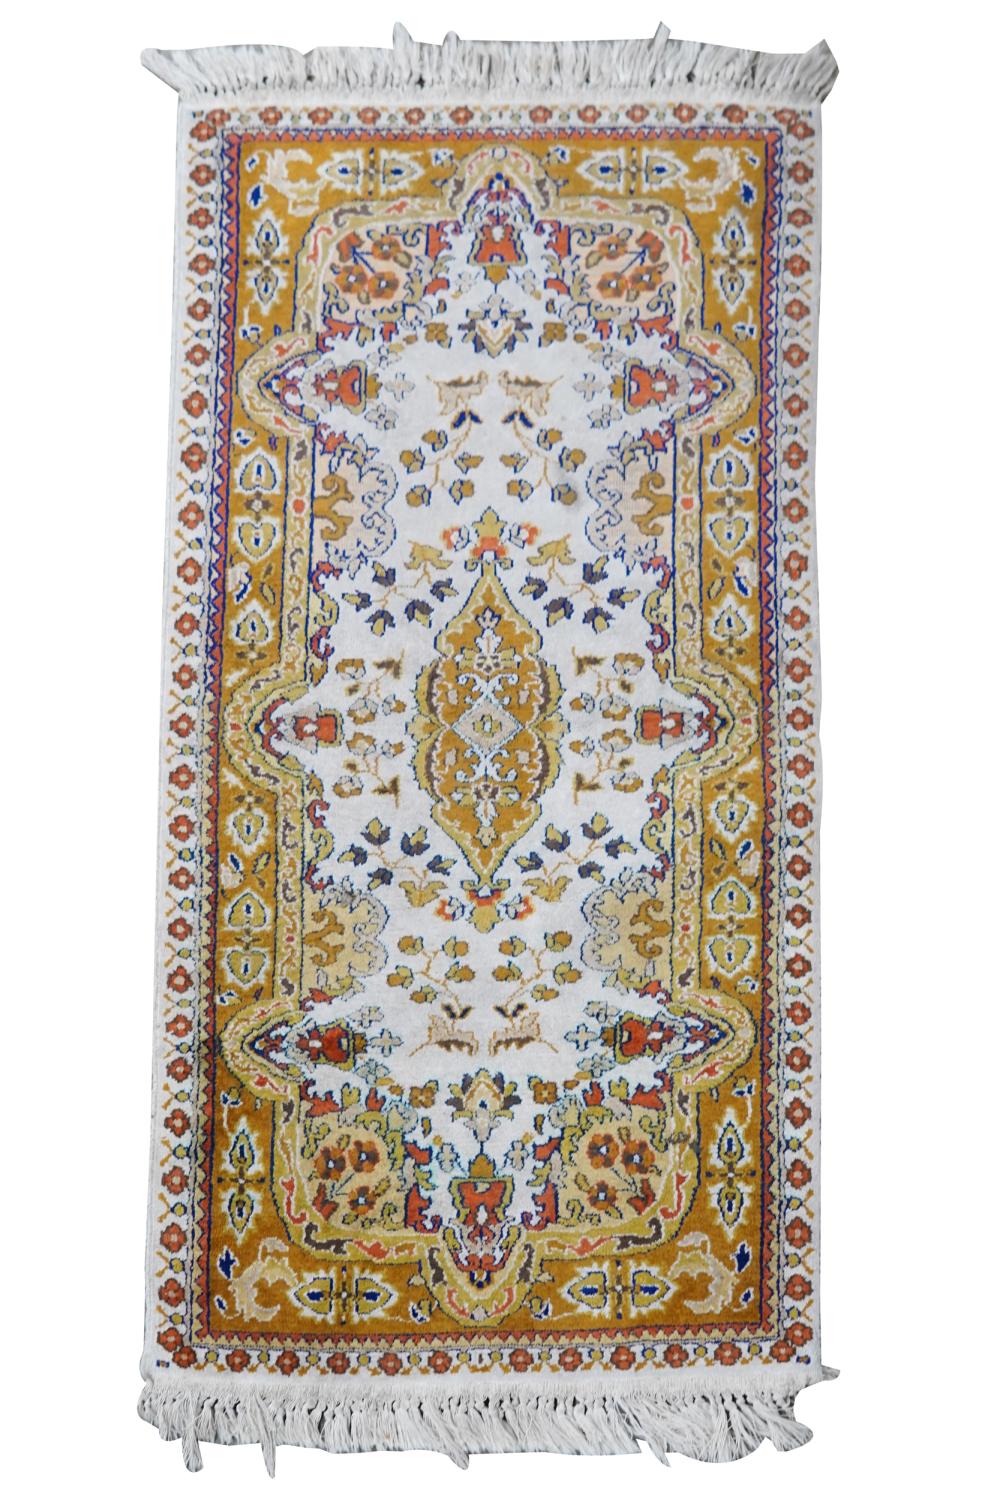 BEIGE FIELD PERSIAN RUGCondition: